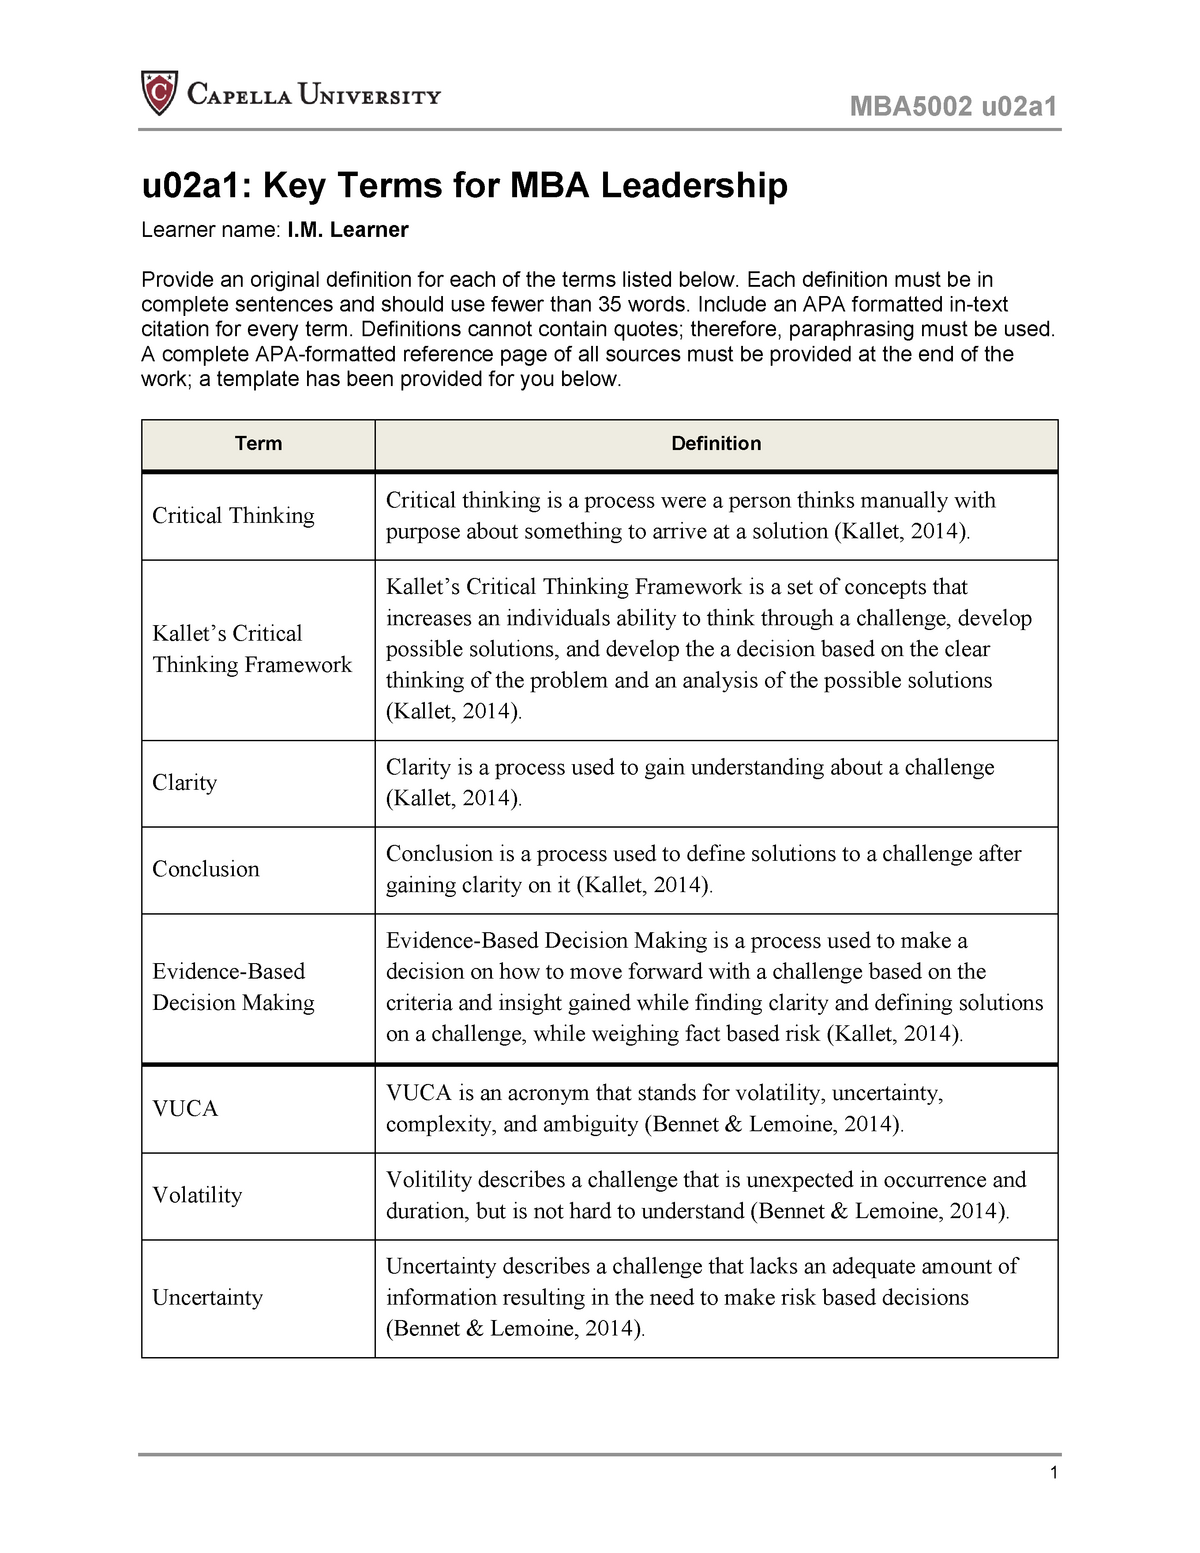 mba leadership assignment